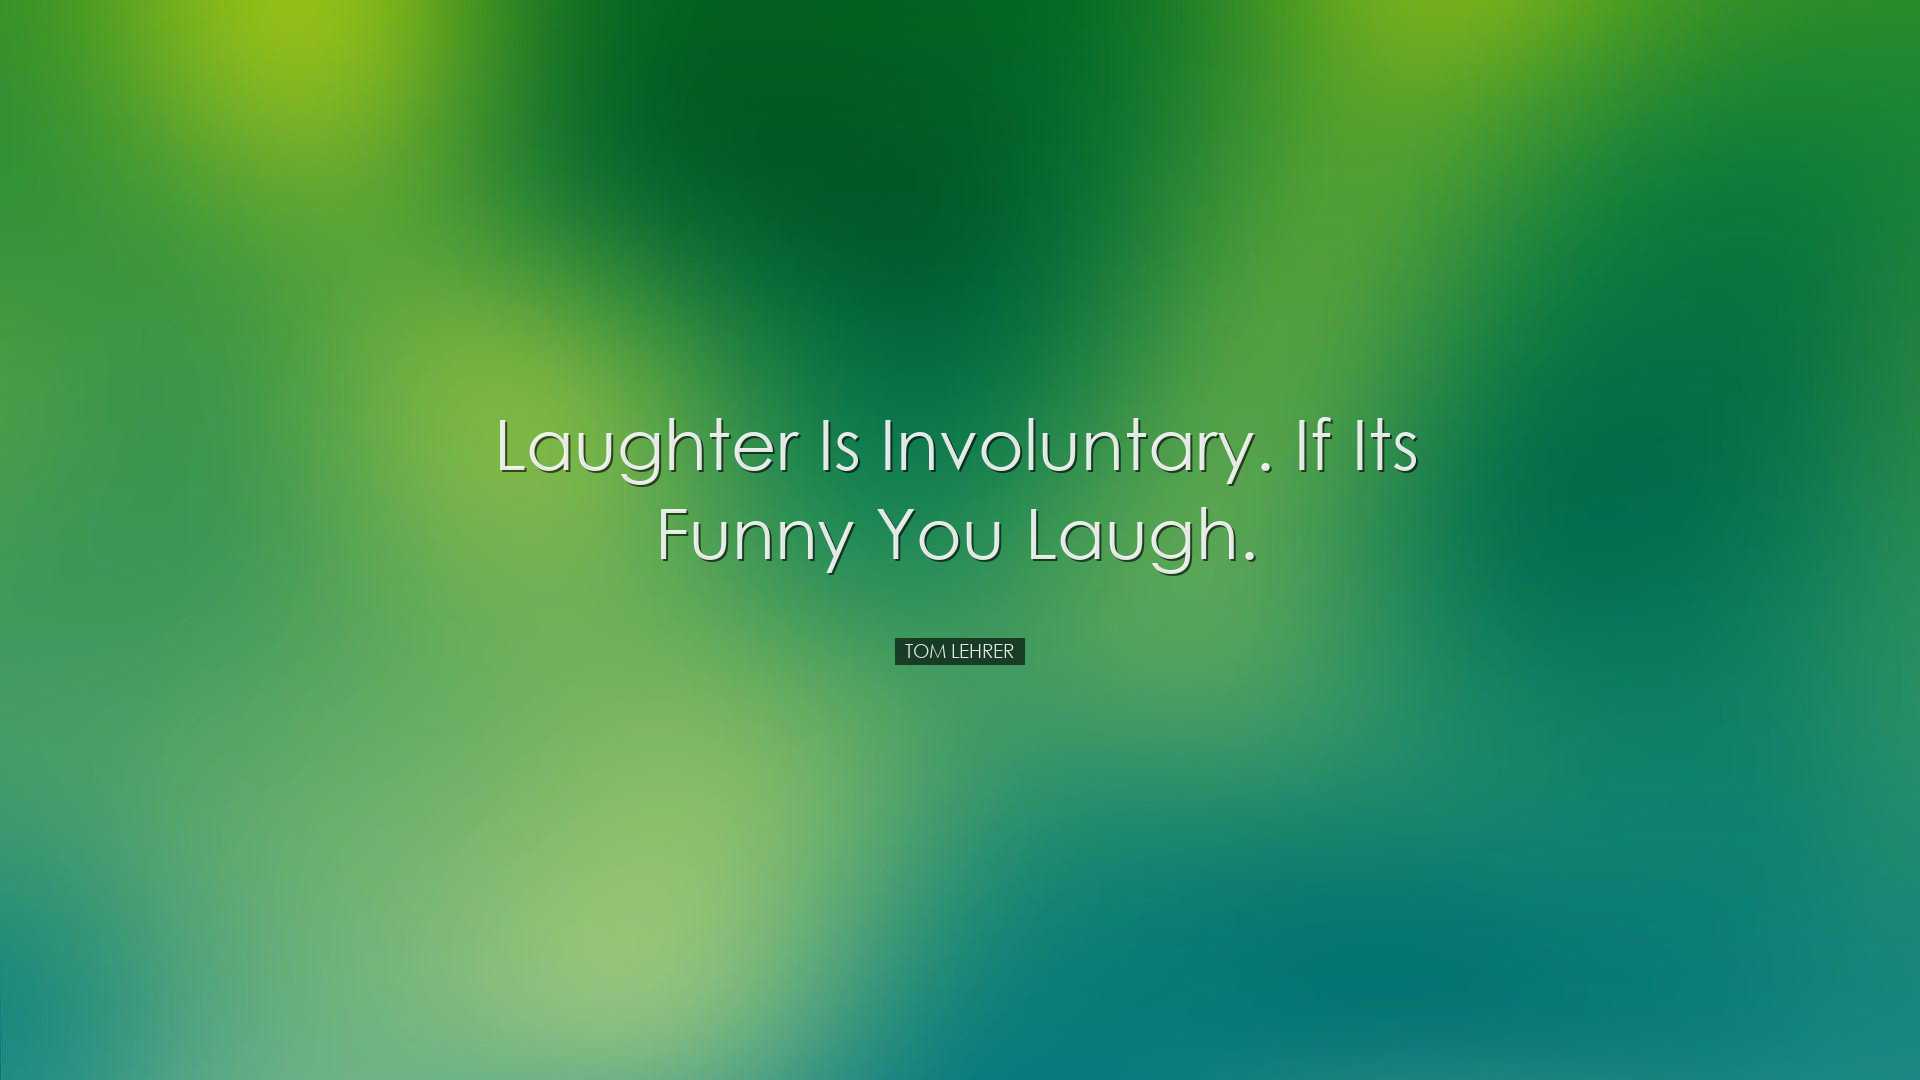 Laughter is involuntary. If its funny you laugh. - Tom Lehrer